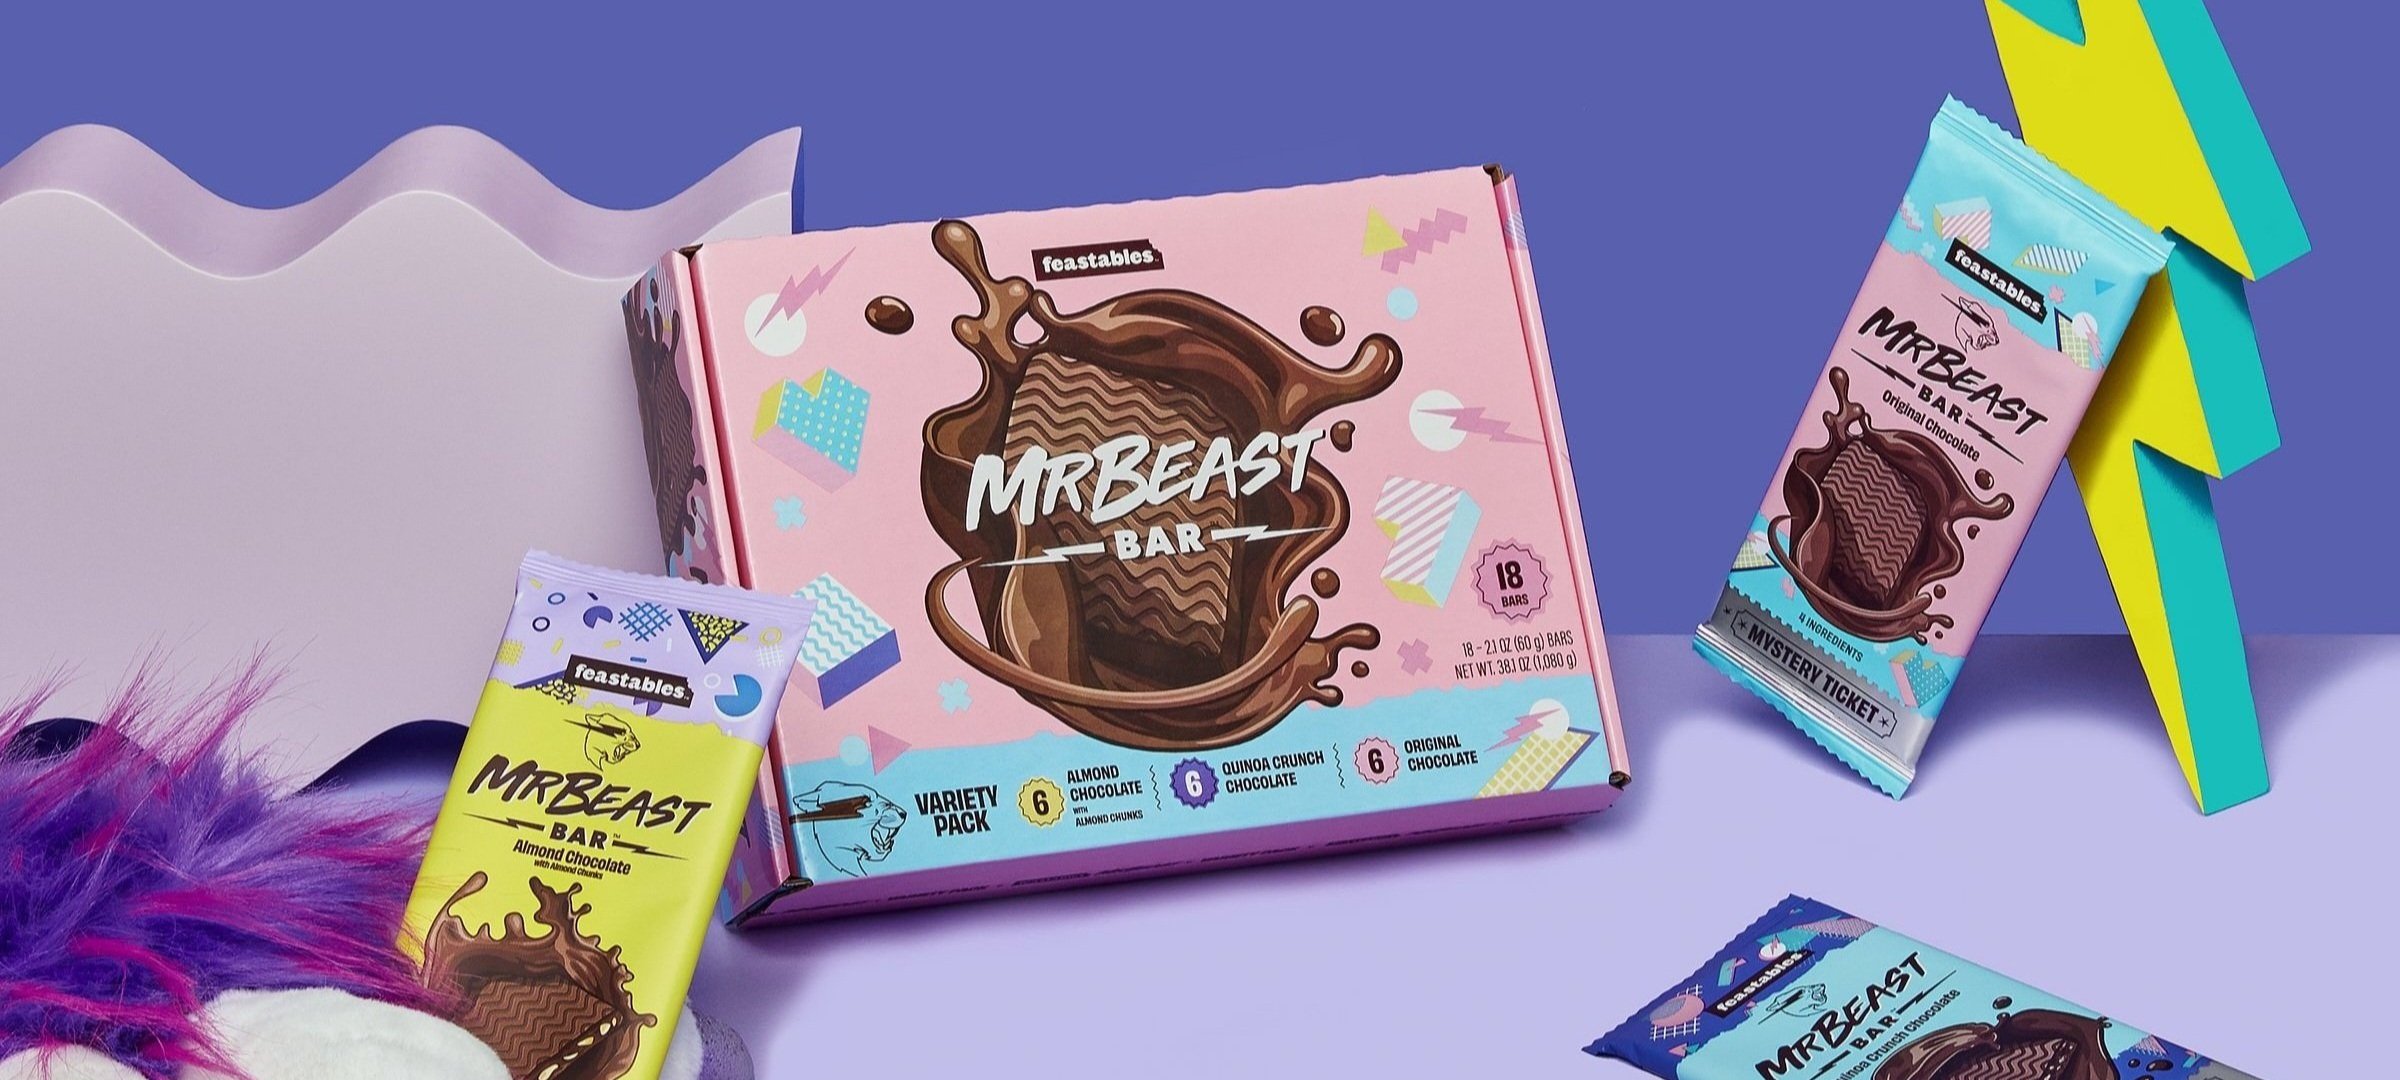 MrBeast (Jimmy Donaldson) lauched Feastables, a brand that reinvents the  snacking experience for Gen-Z consumers. — Enlisted Design